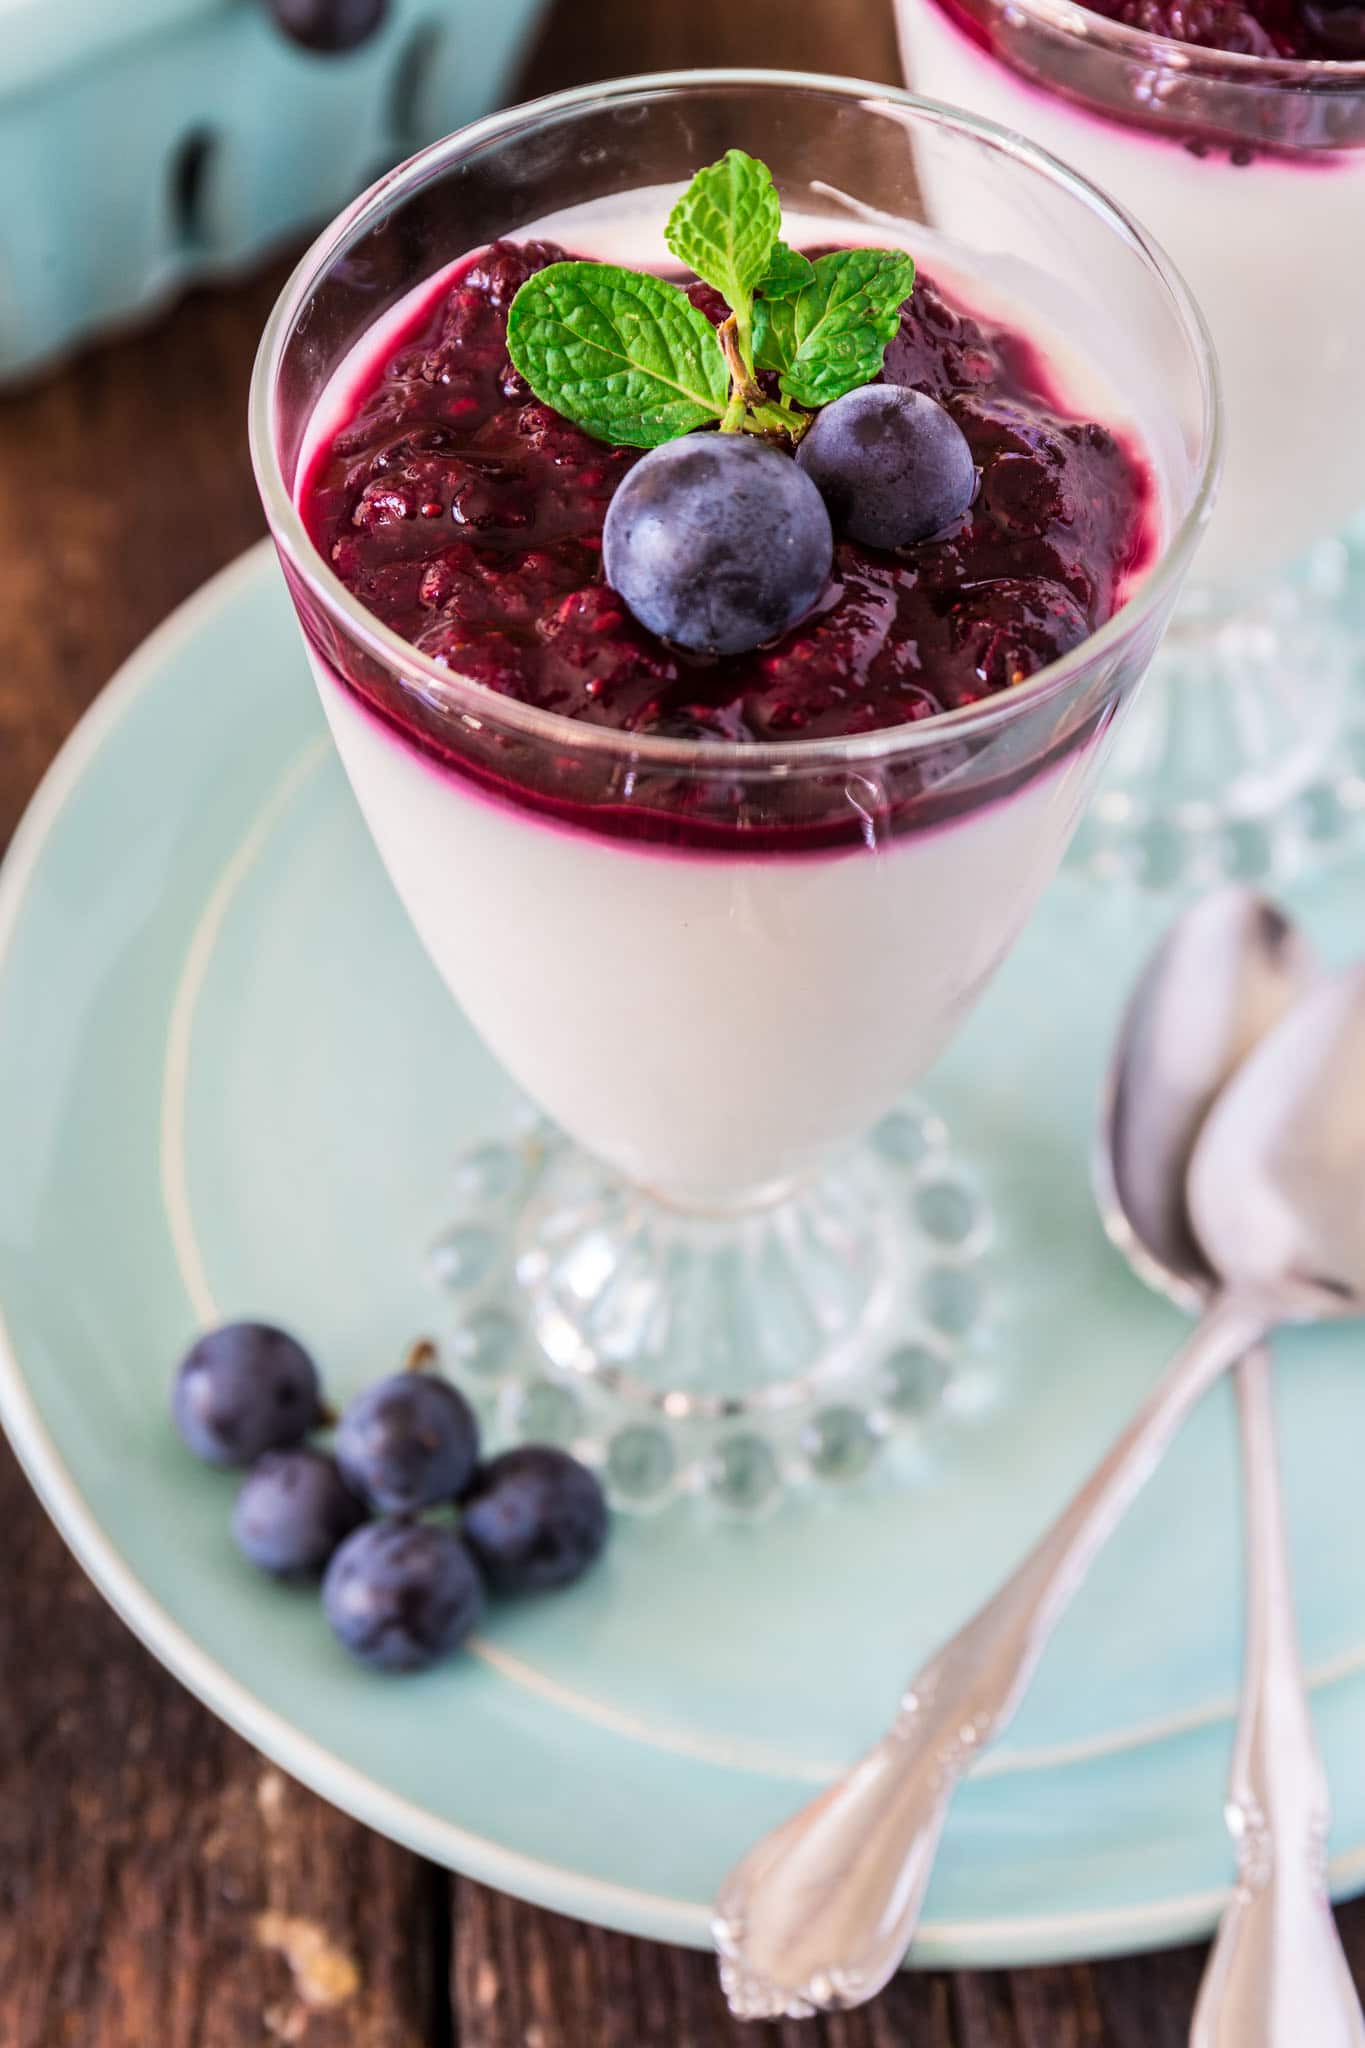 Yogurt Panna Cotta with Grape and Berry Compote | www.oliviascuisine.com | This lighter version of the classic panna cotta is made with greek yogurt instead of cream, so it won't ruin your diet! (Recipe and food photography by @oliviascuisine.)